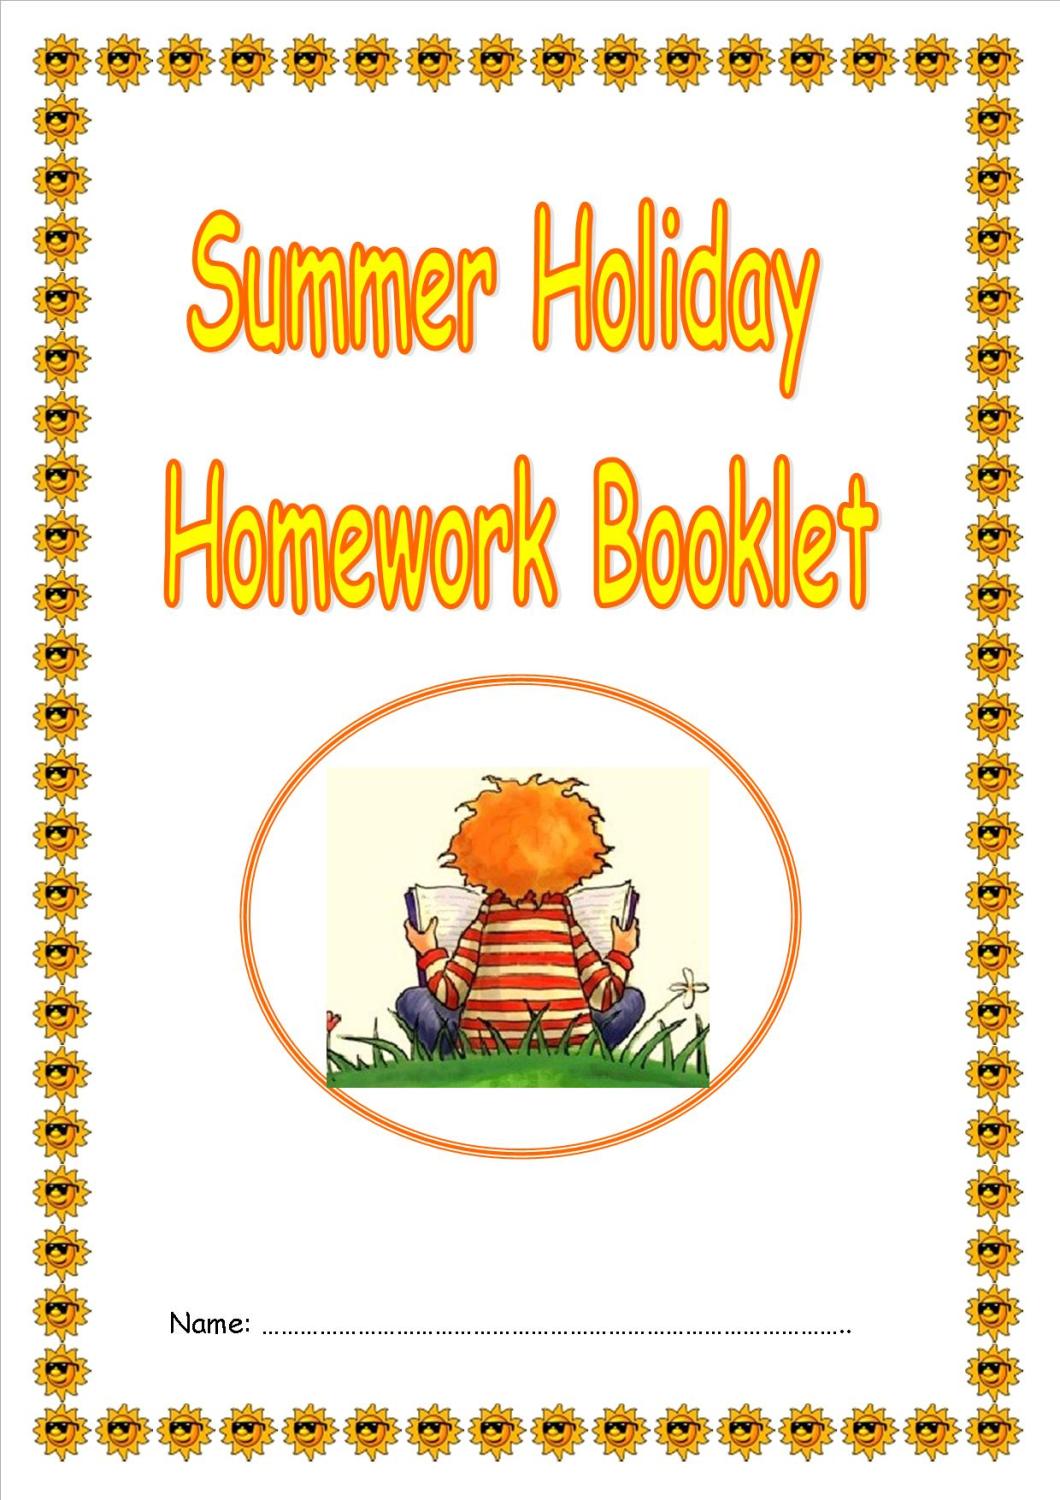 cover page for summer holiday homework